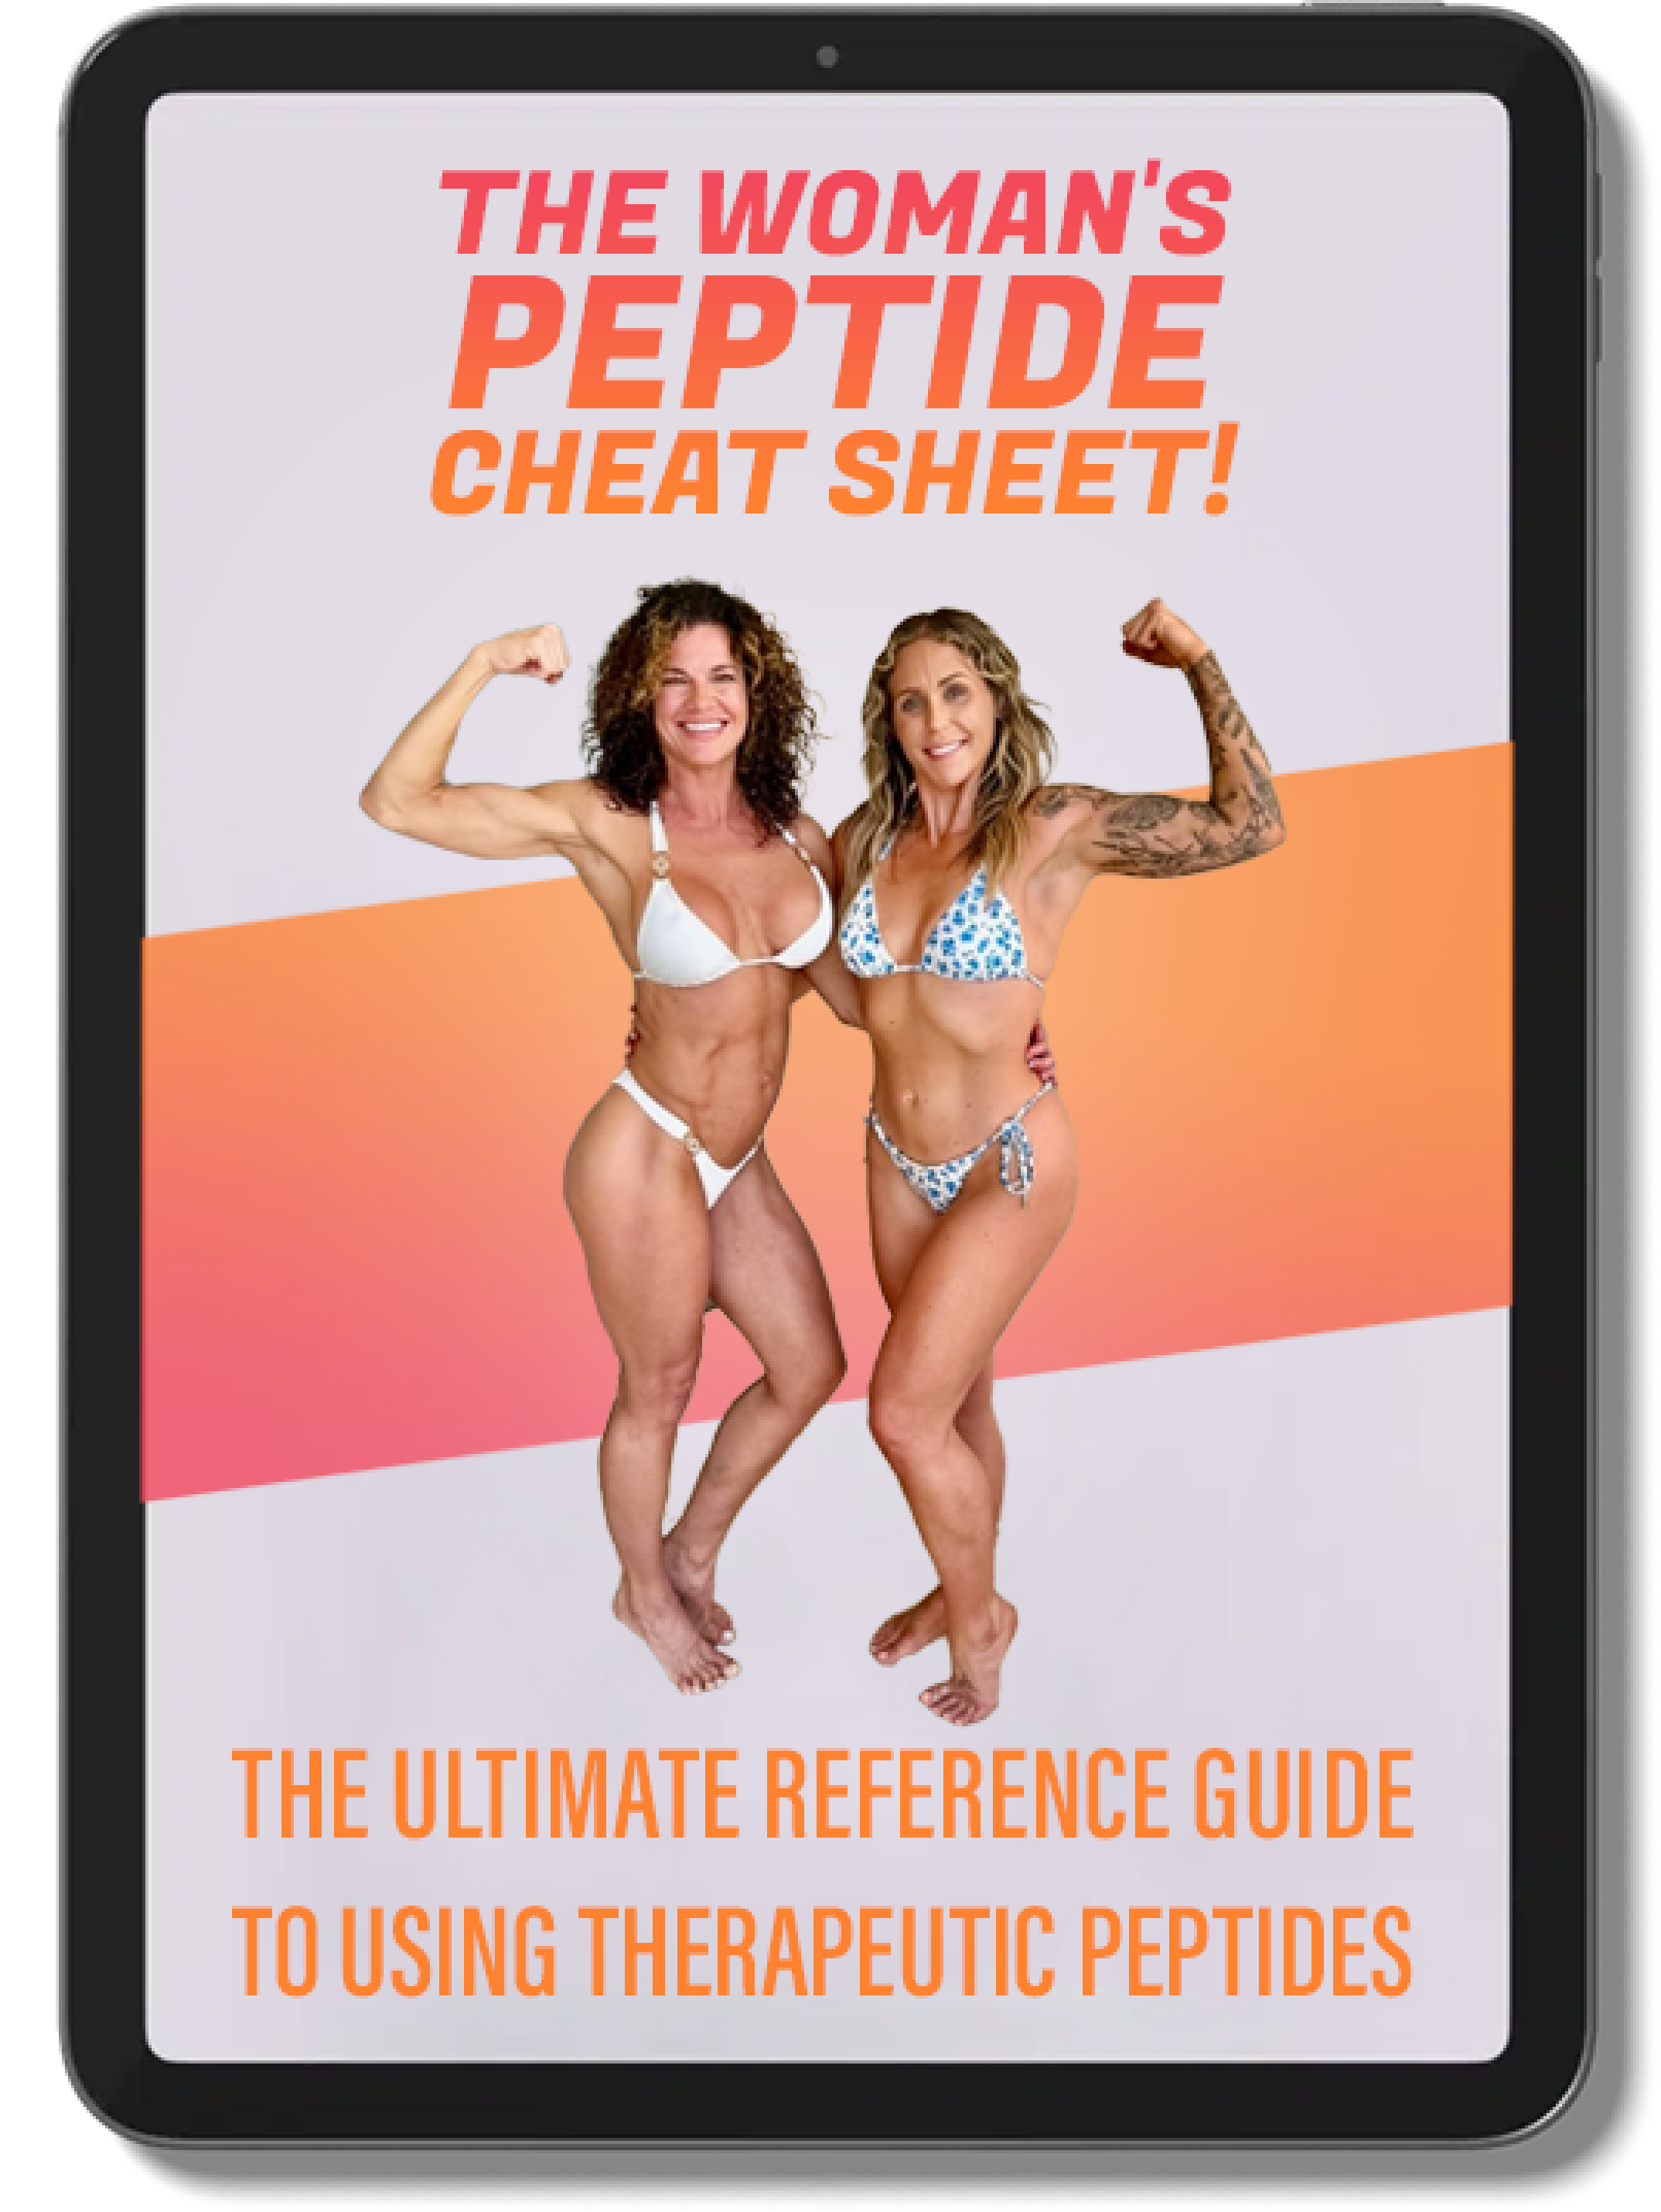 The ultimate reference guide to useing therapeutic peptides